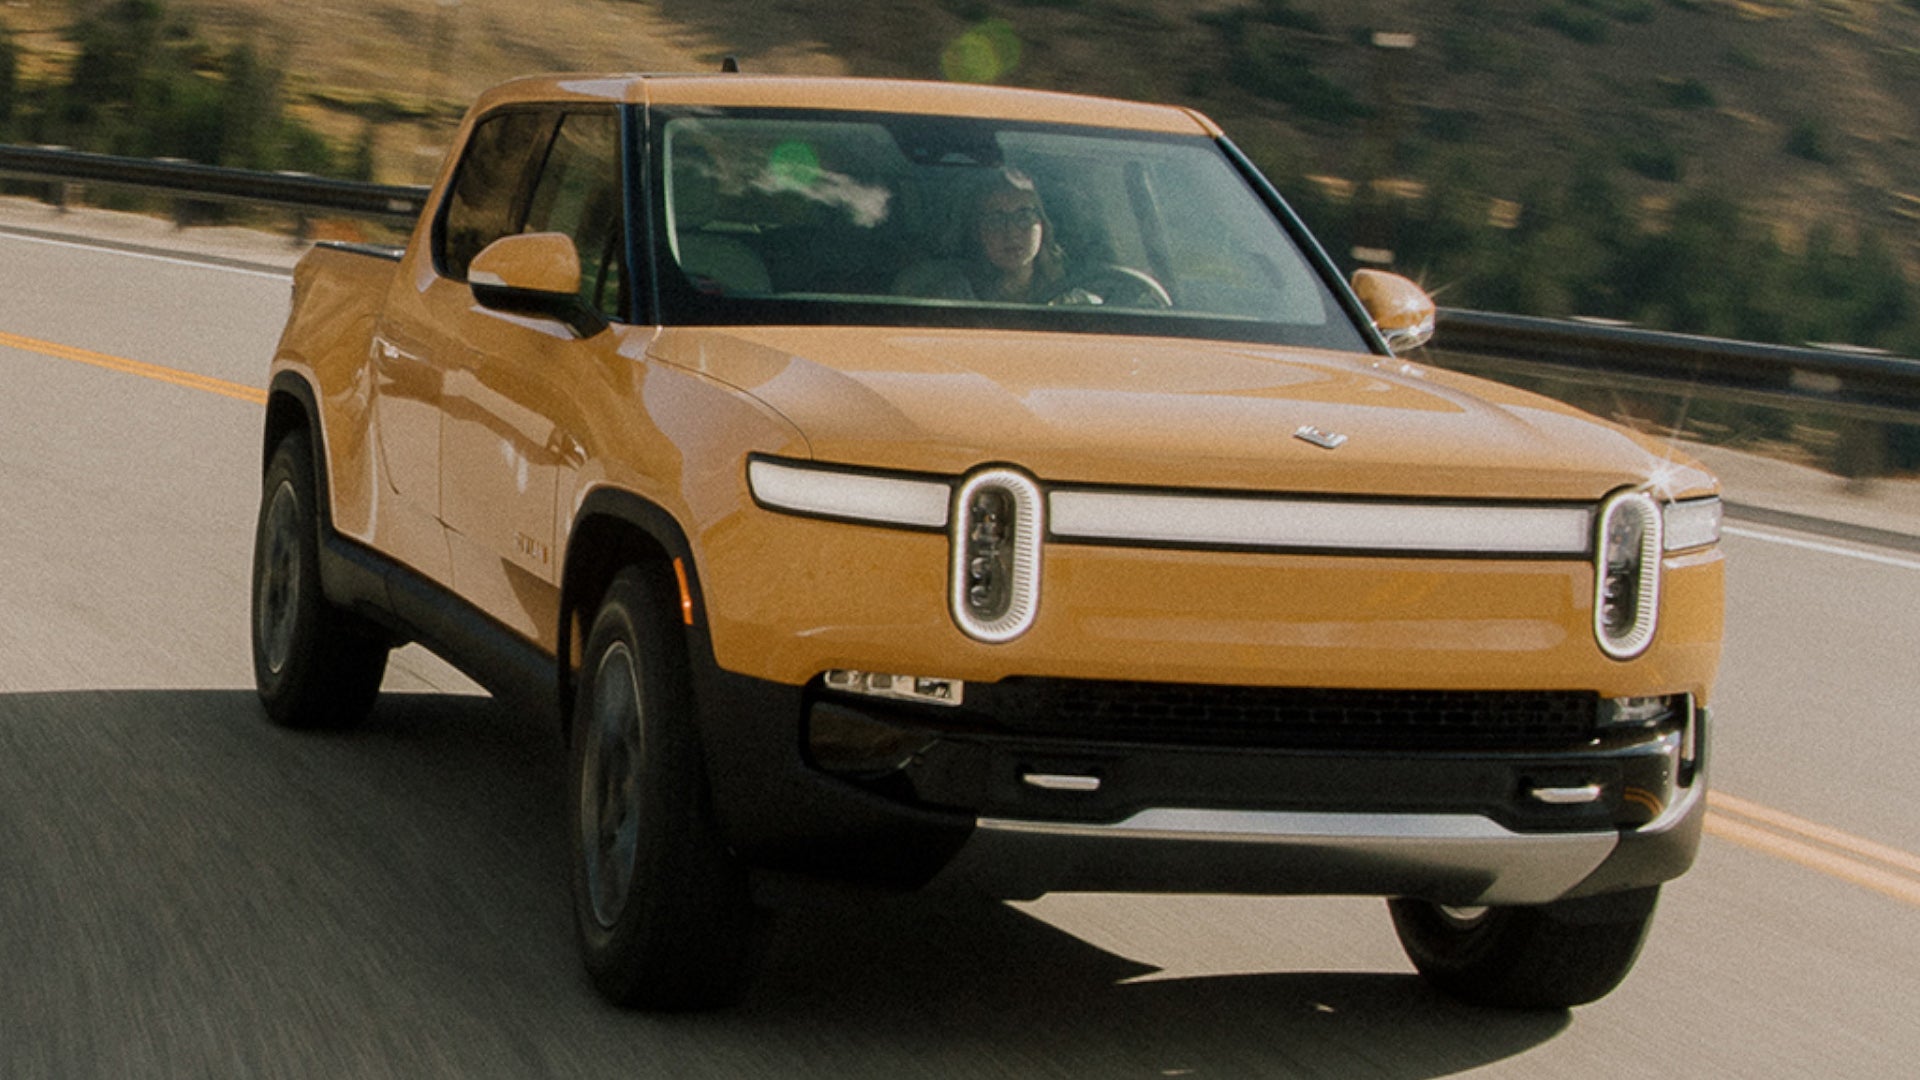 Rivian R1T Owner Targeted by HOA for Parking in Their Driveway